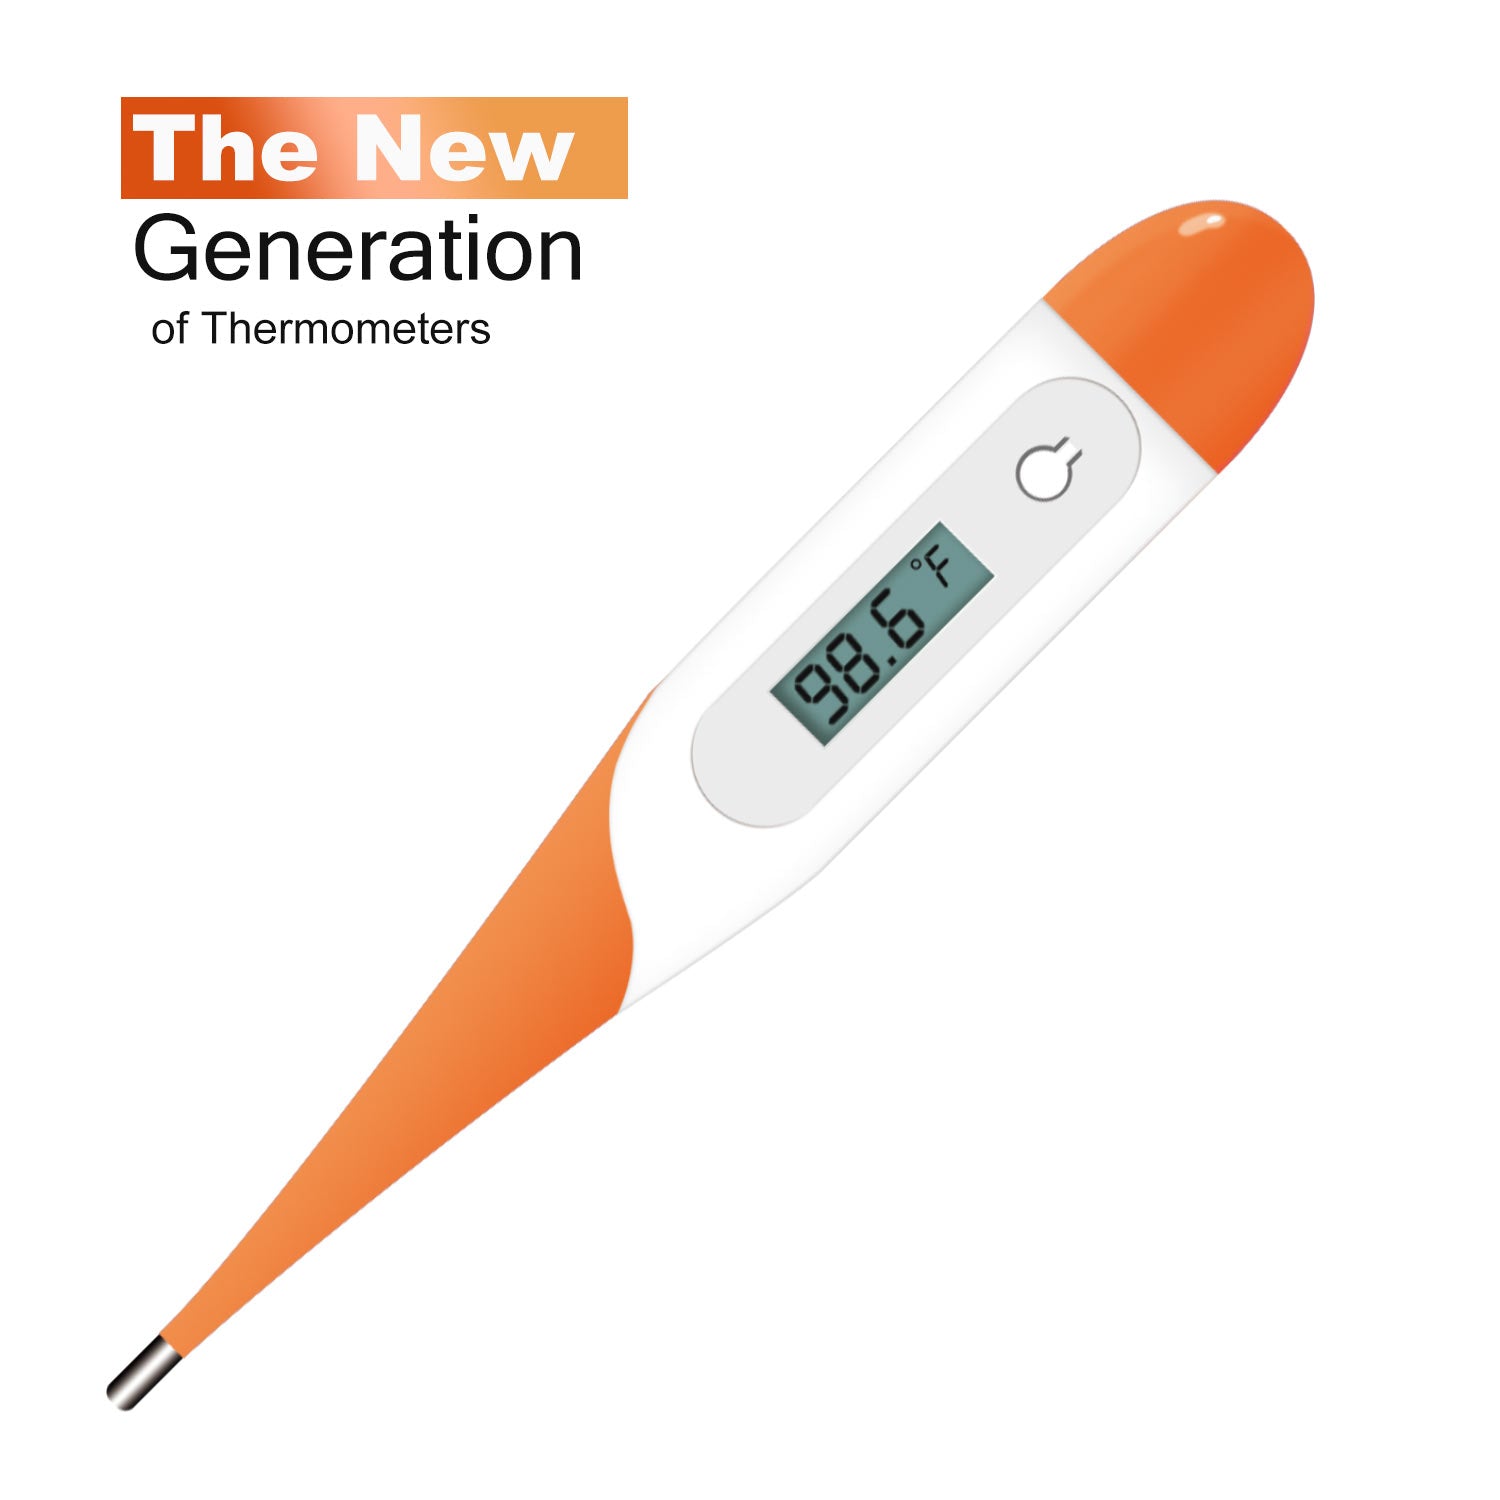 Digital Oral Thermometer for Adult and Kid, Easy@Home Accurate Fast Reading  Body Temperature Thermometer for Oral and Underarm Measurement with Fever